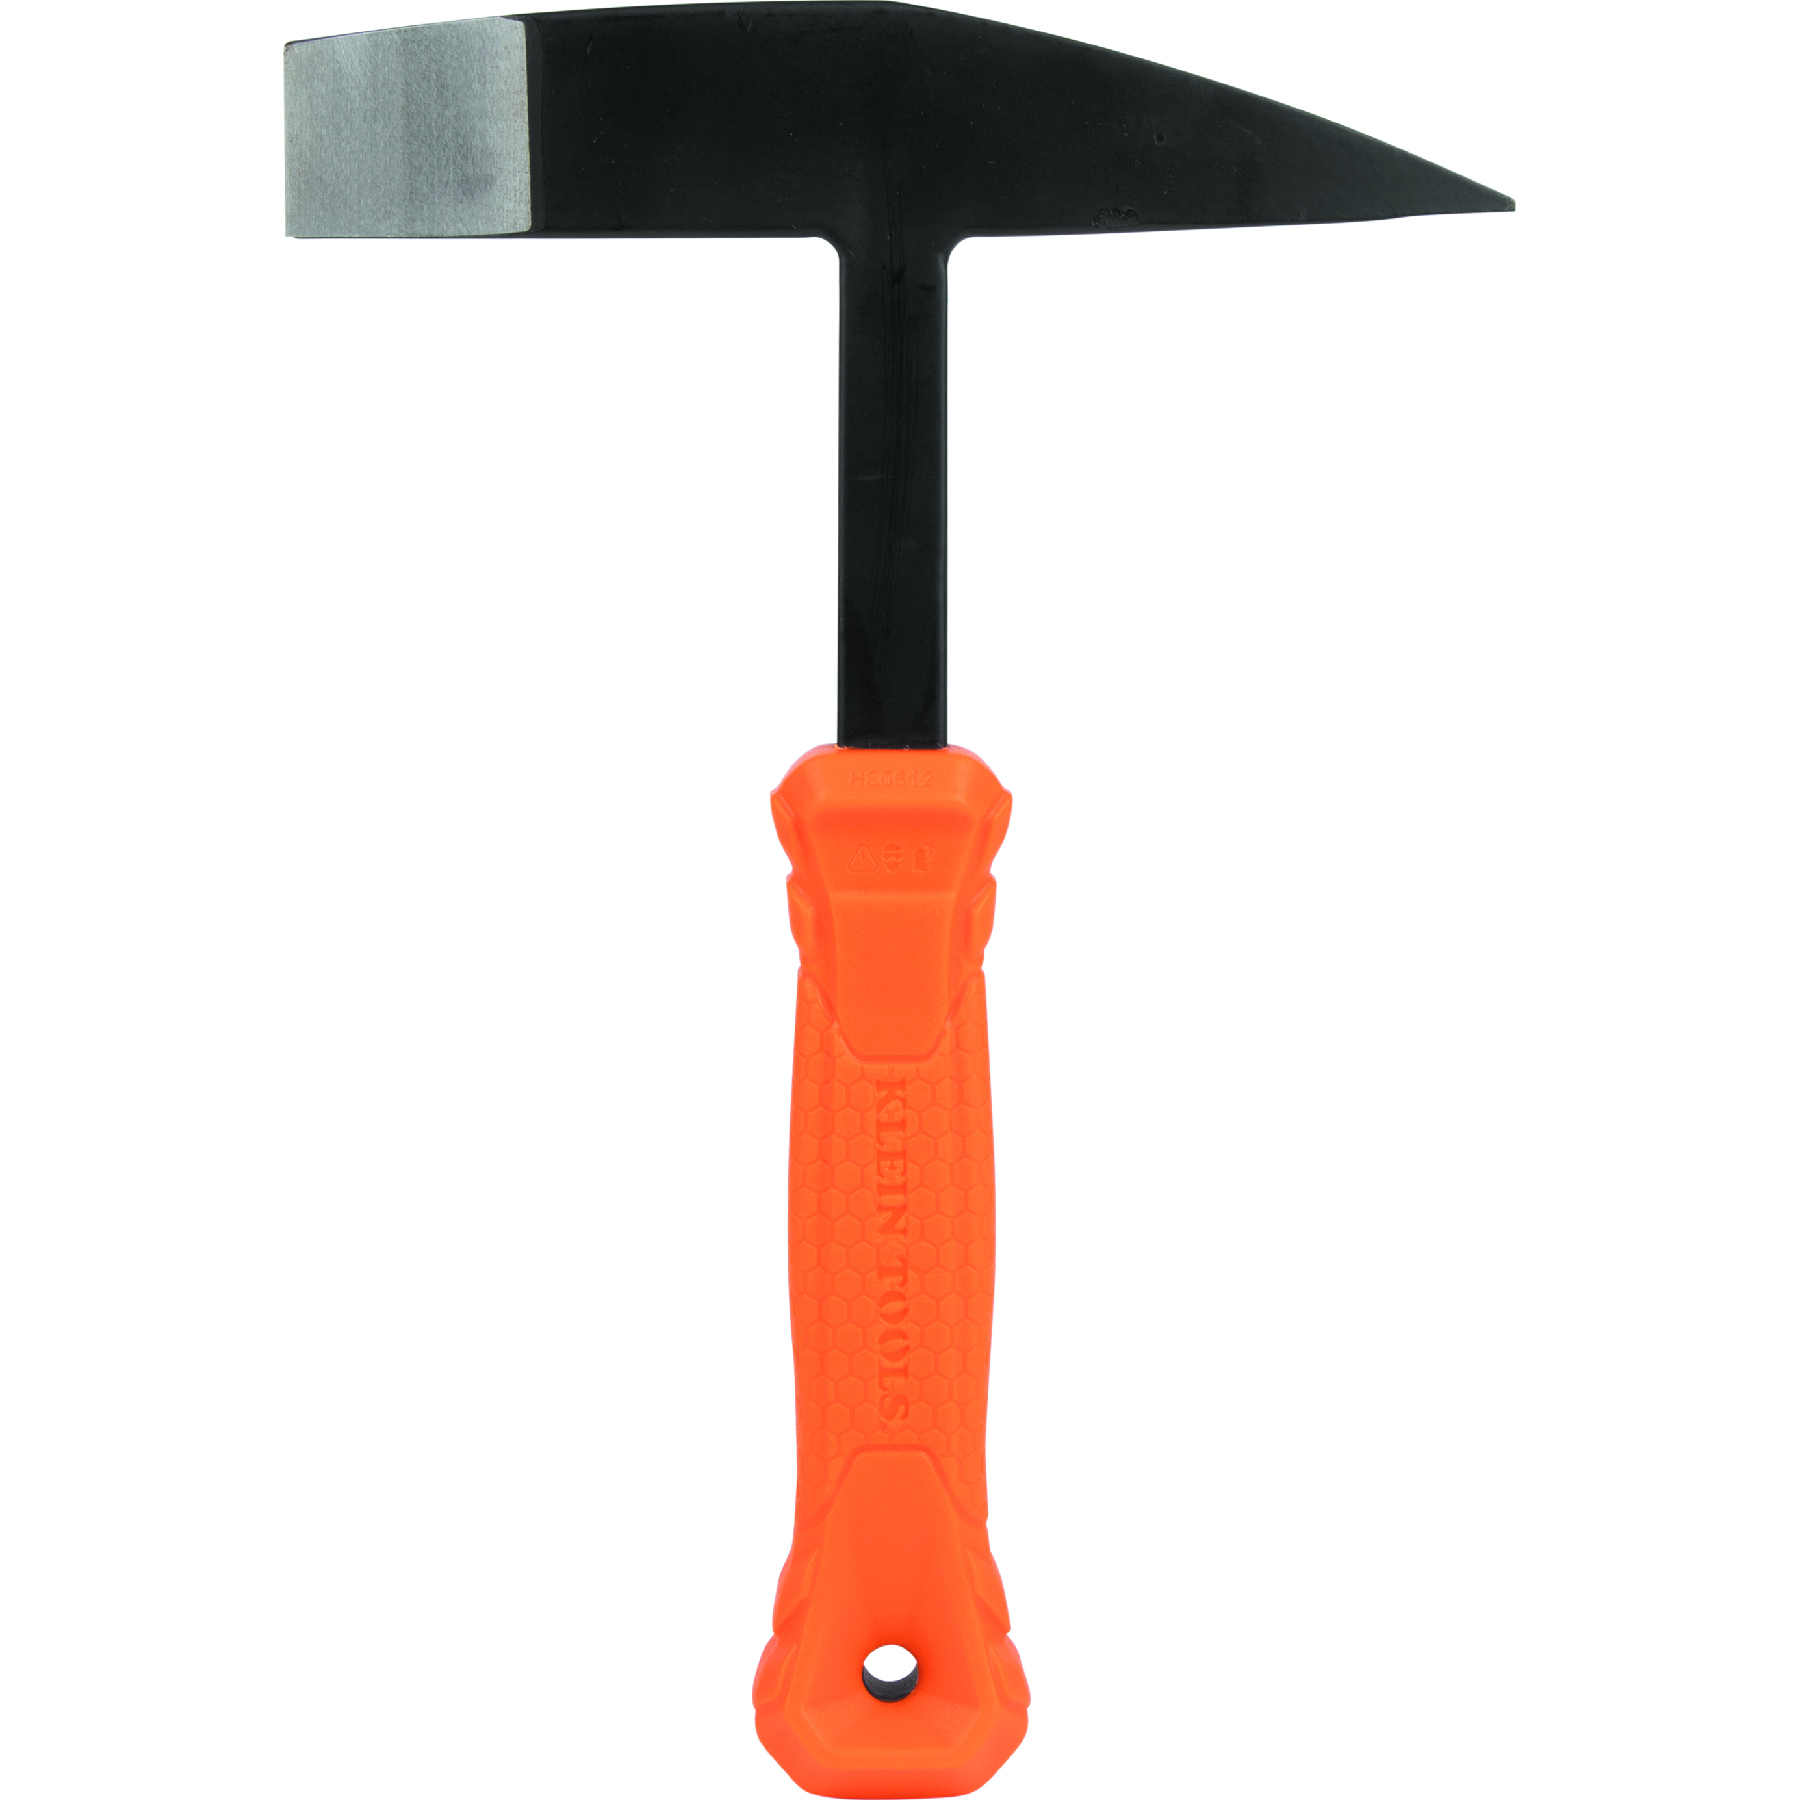 H80612 Welder's Chipping Hammer, Heat-Resistant Handle, 10-Ounce, 7-Inch - Image